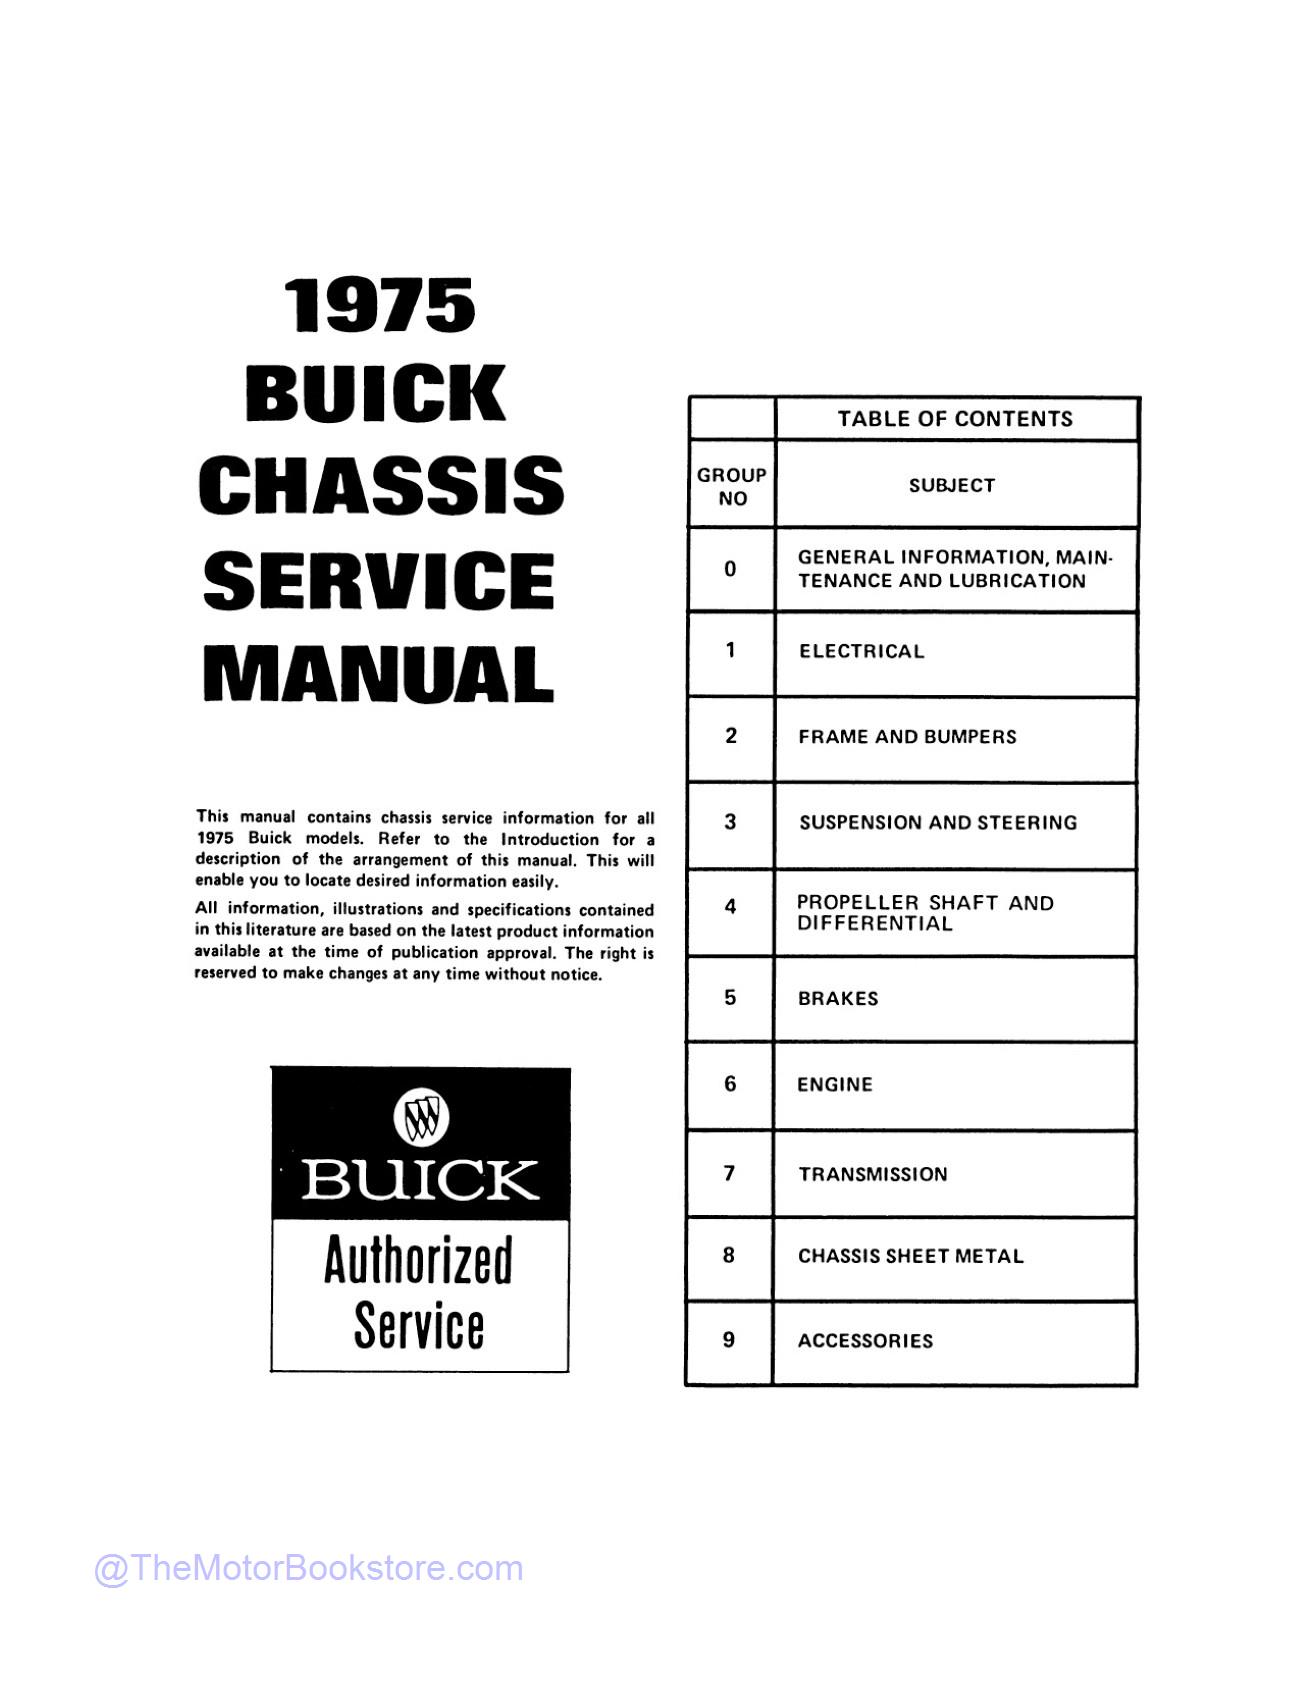 1975 Buick Chassis Service Manual All Series  - Table of Contents